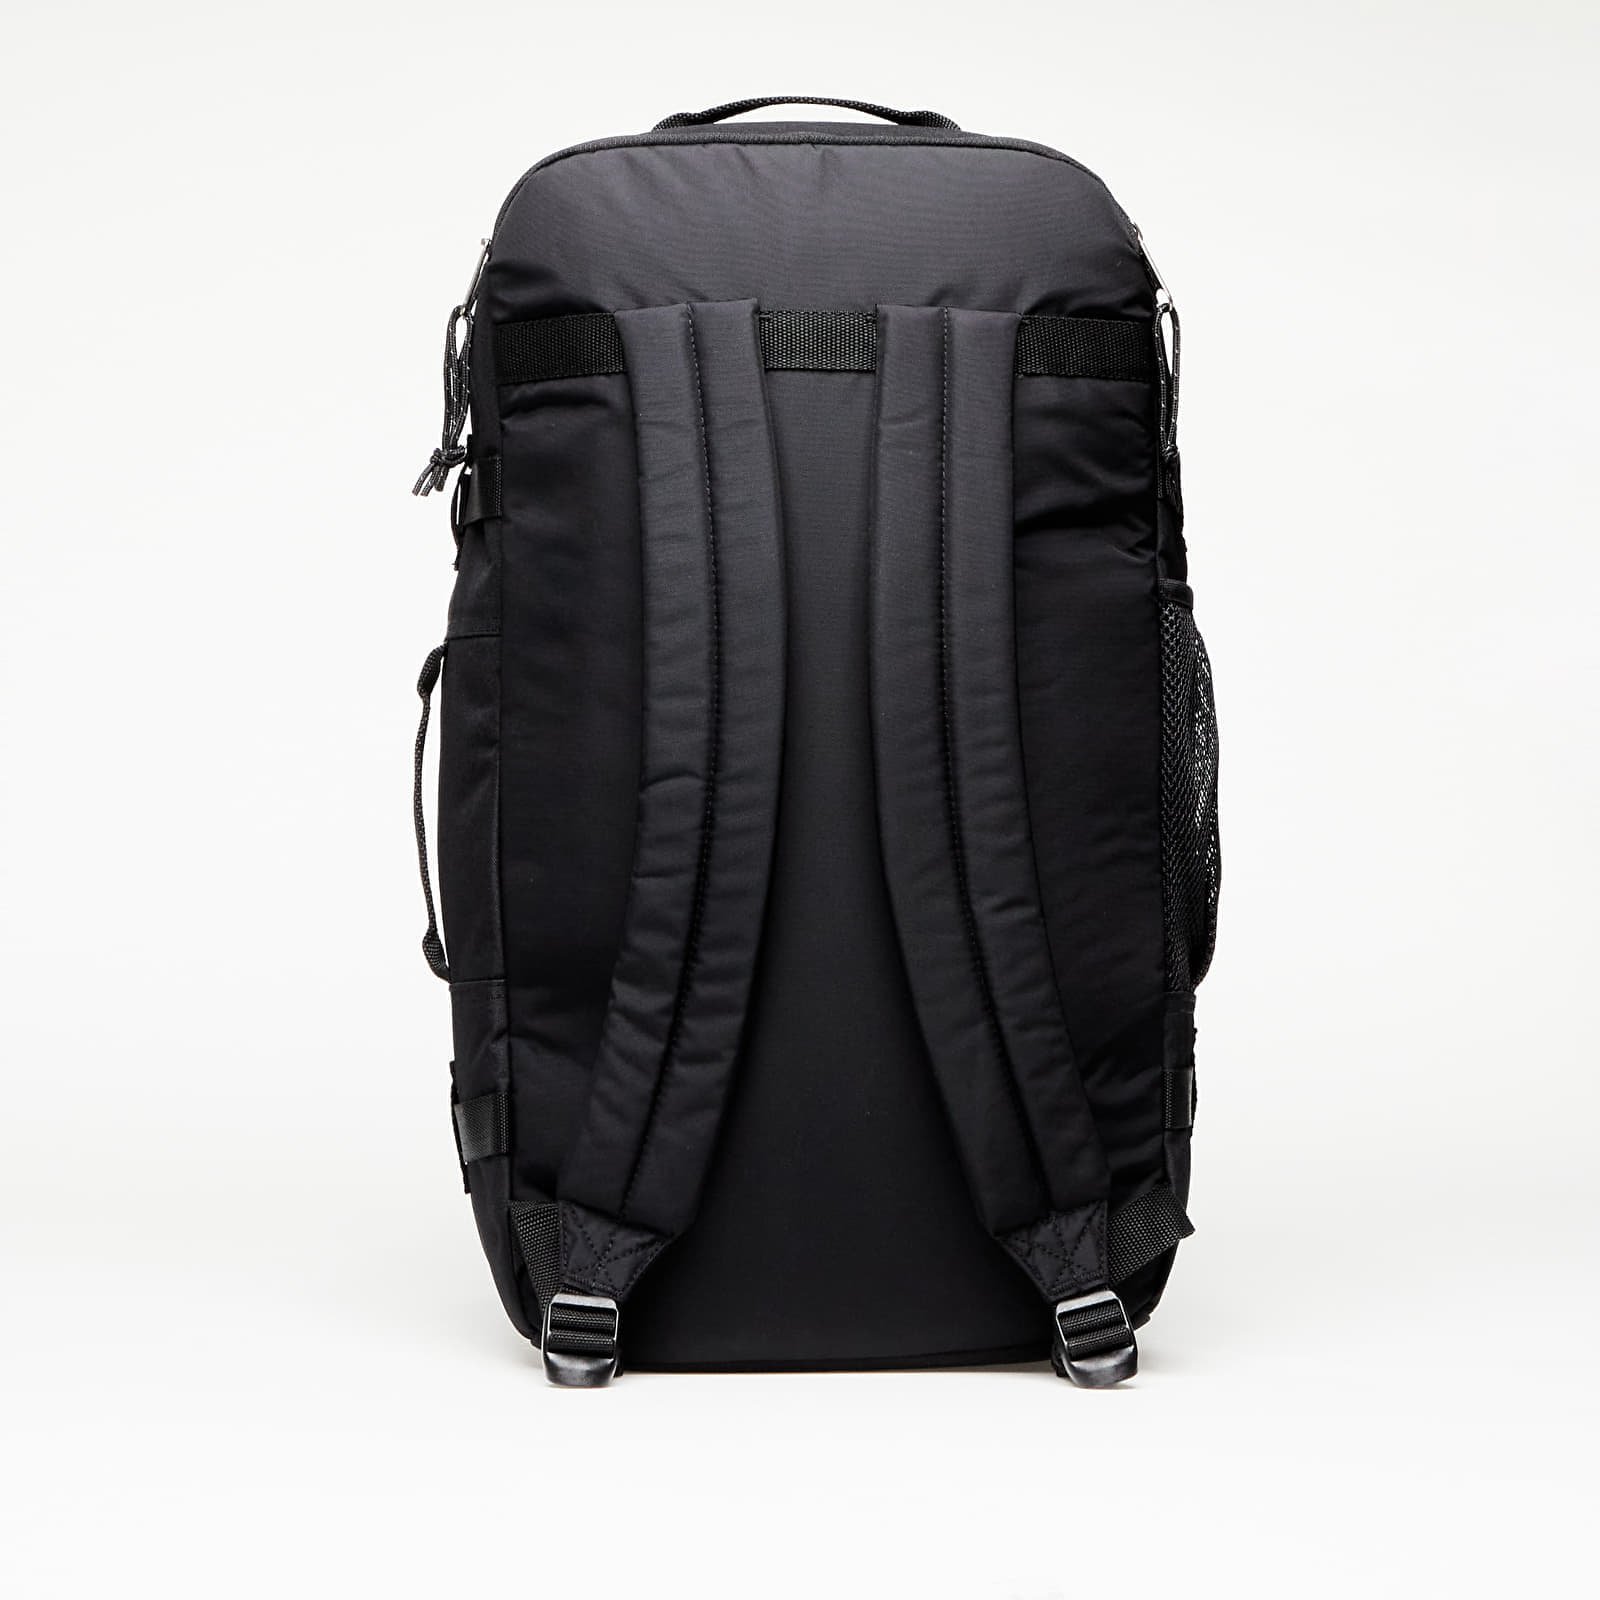 Carry Bagage Cabine Backpack